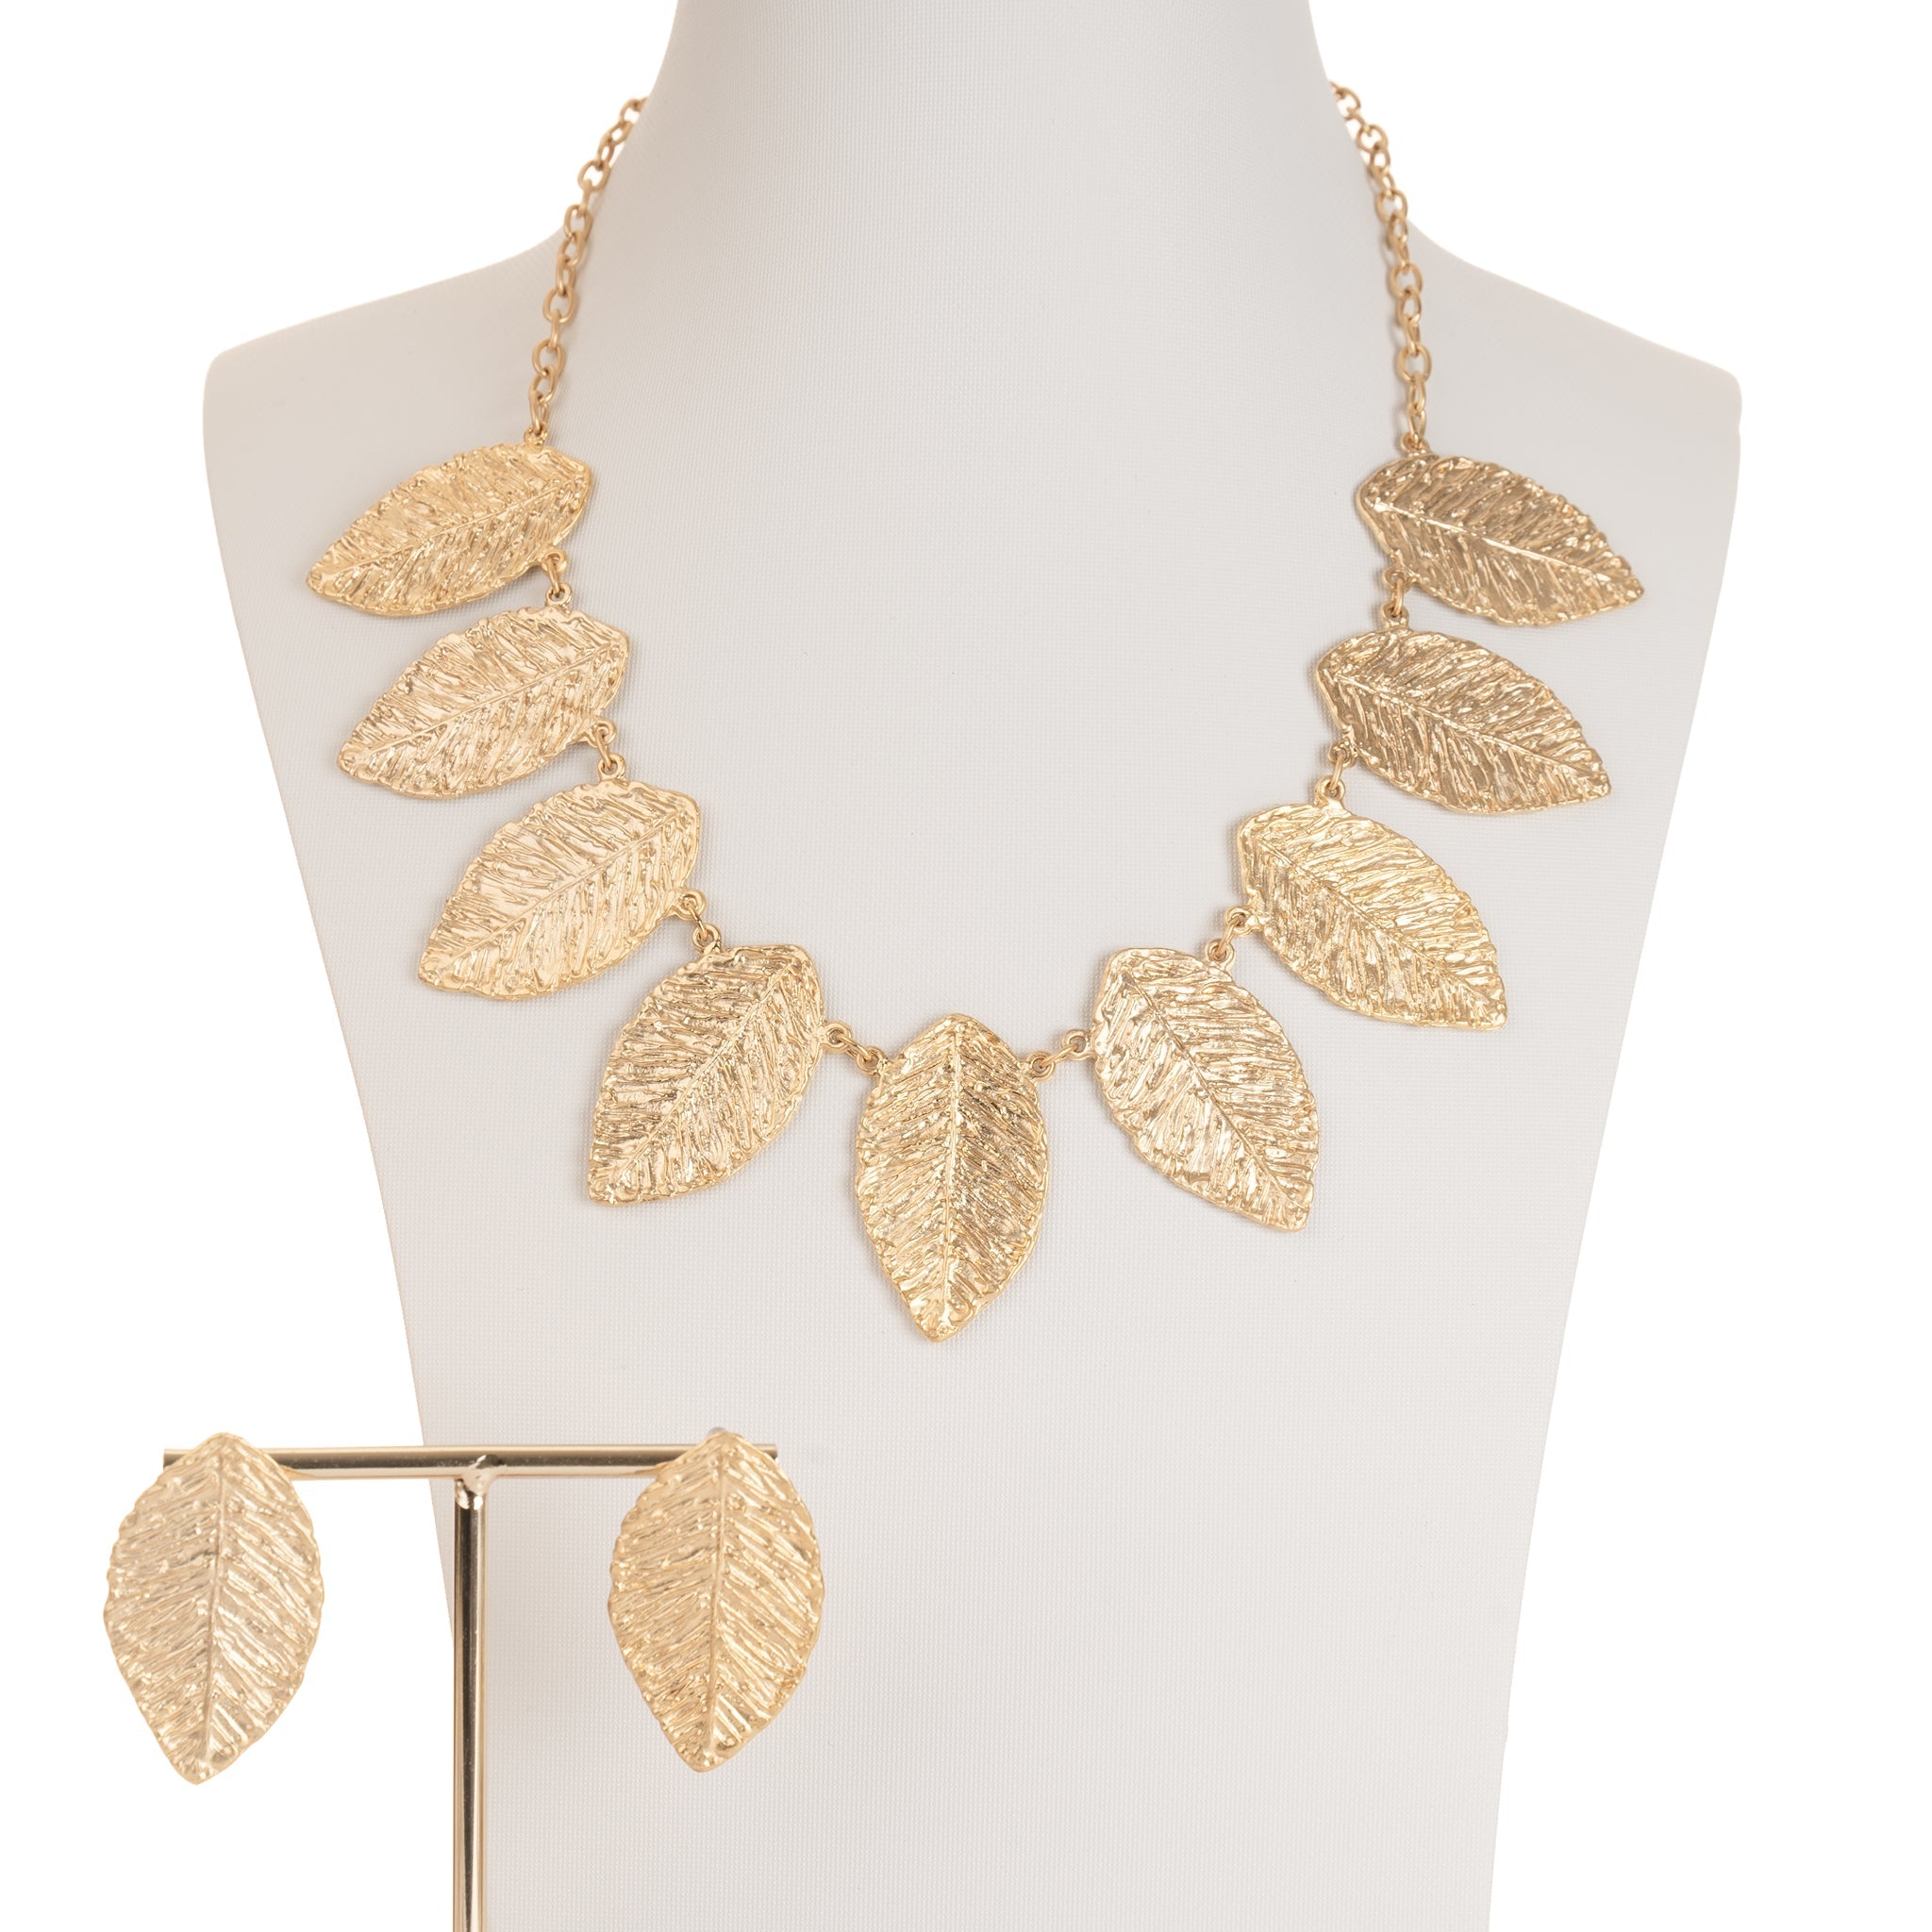 Aspen Gold Necklace and Earrings Set - Cherry Blossom